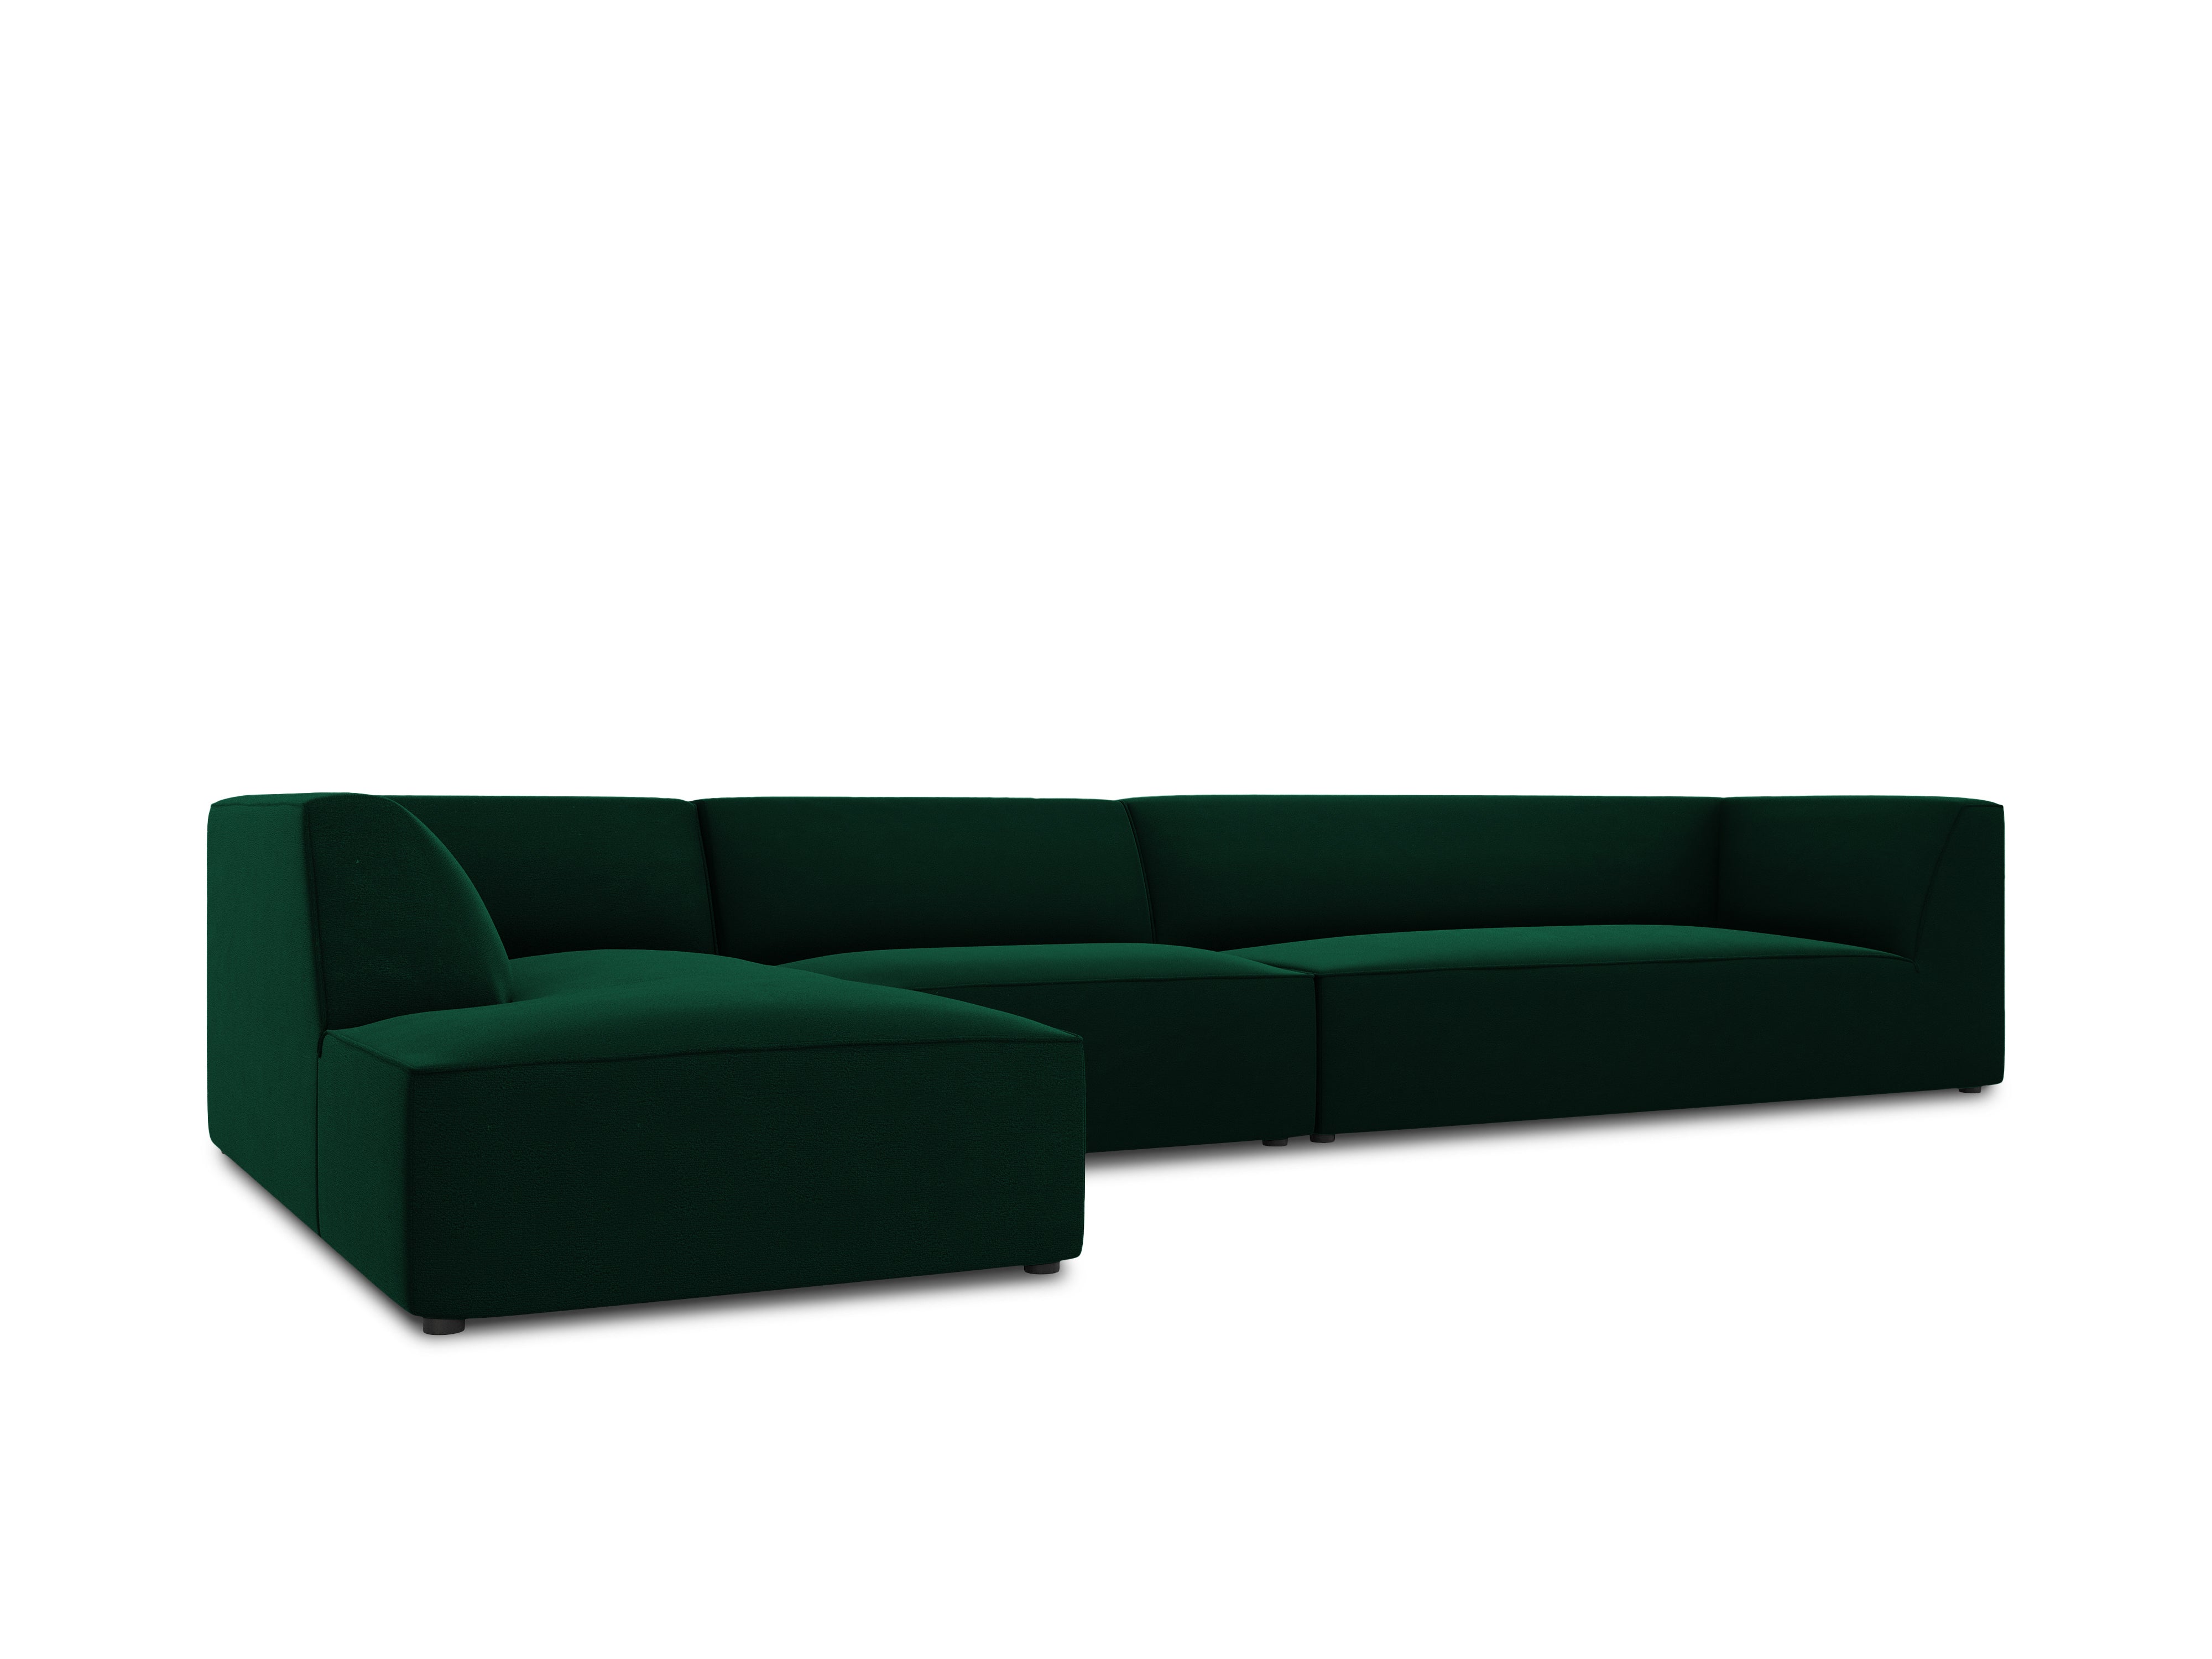 Bottle sofa green with gloss